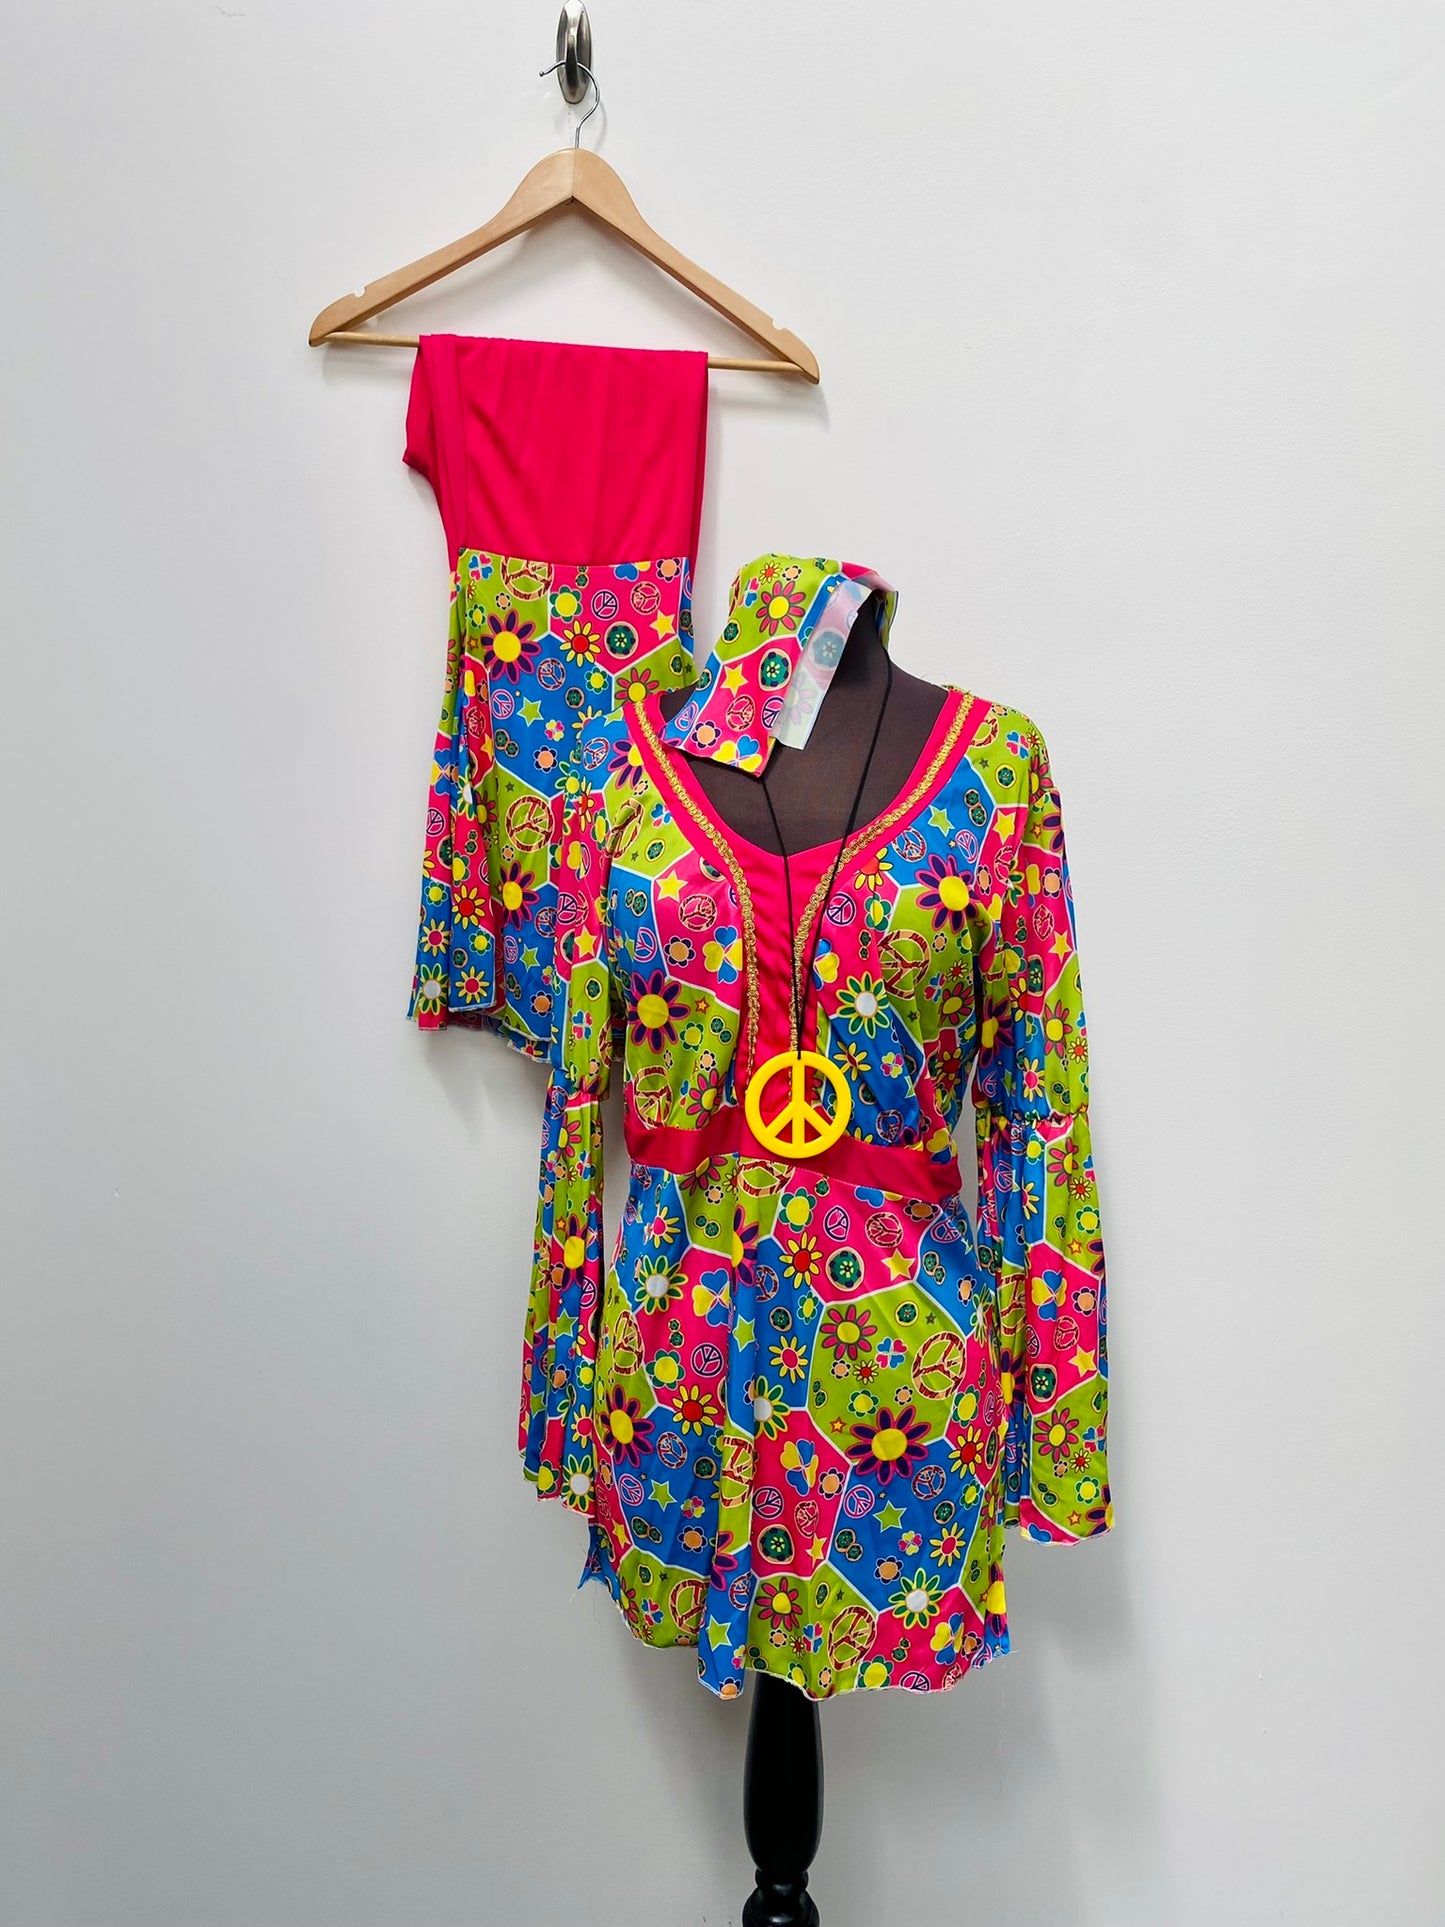 60s-70s style Groovy Chick Hippie Outfit Size large 18-20 - Ex Hire Fancy Dress Costume